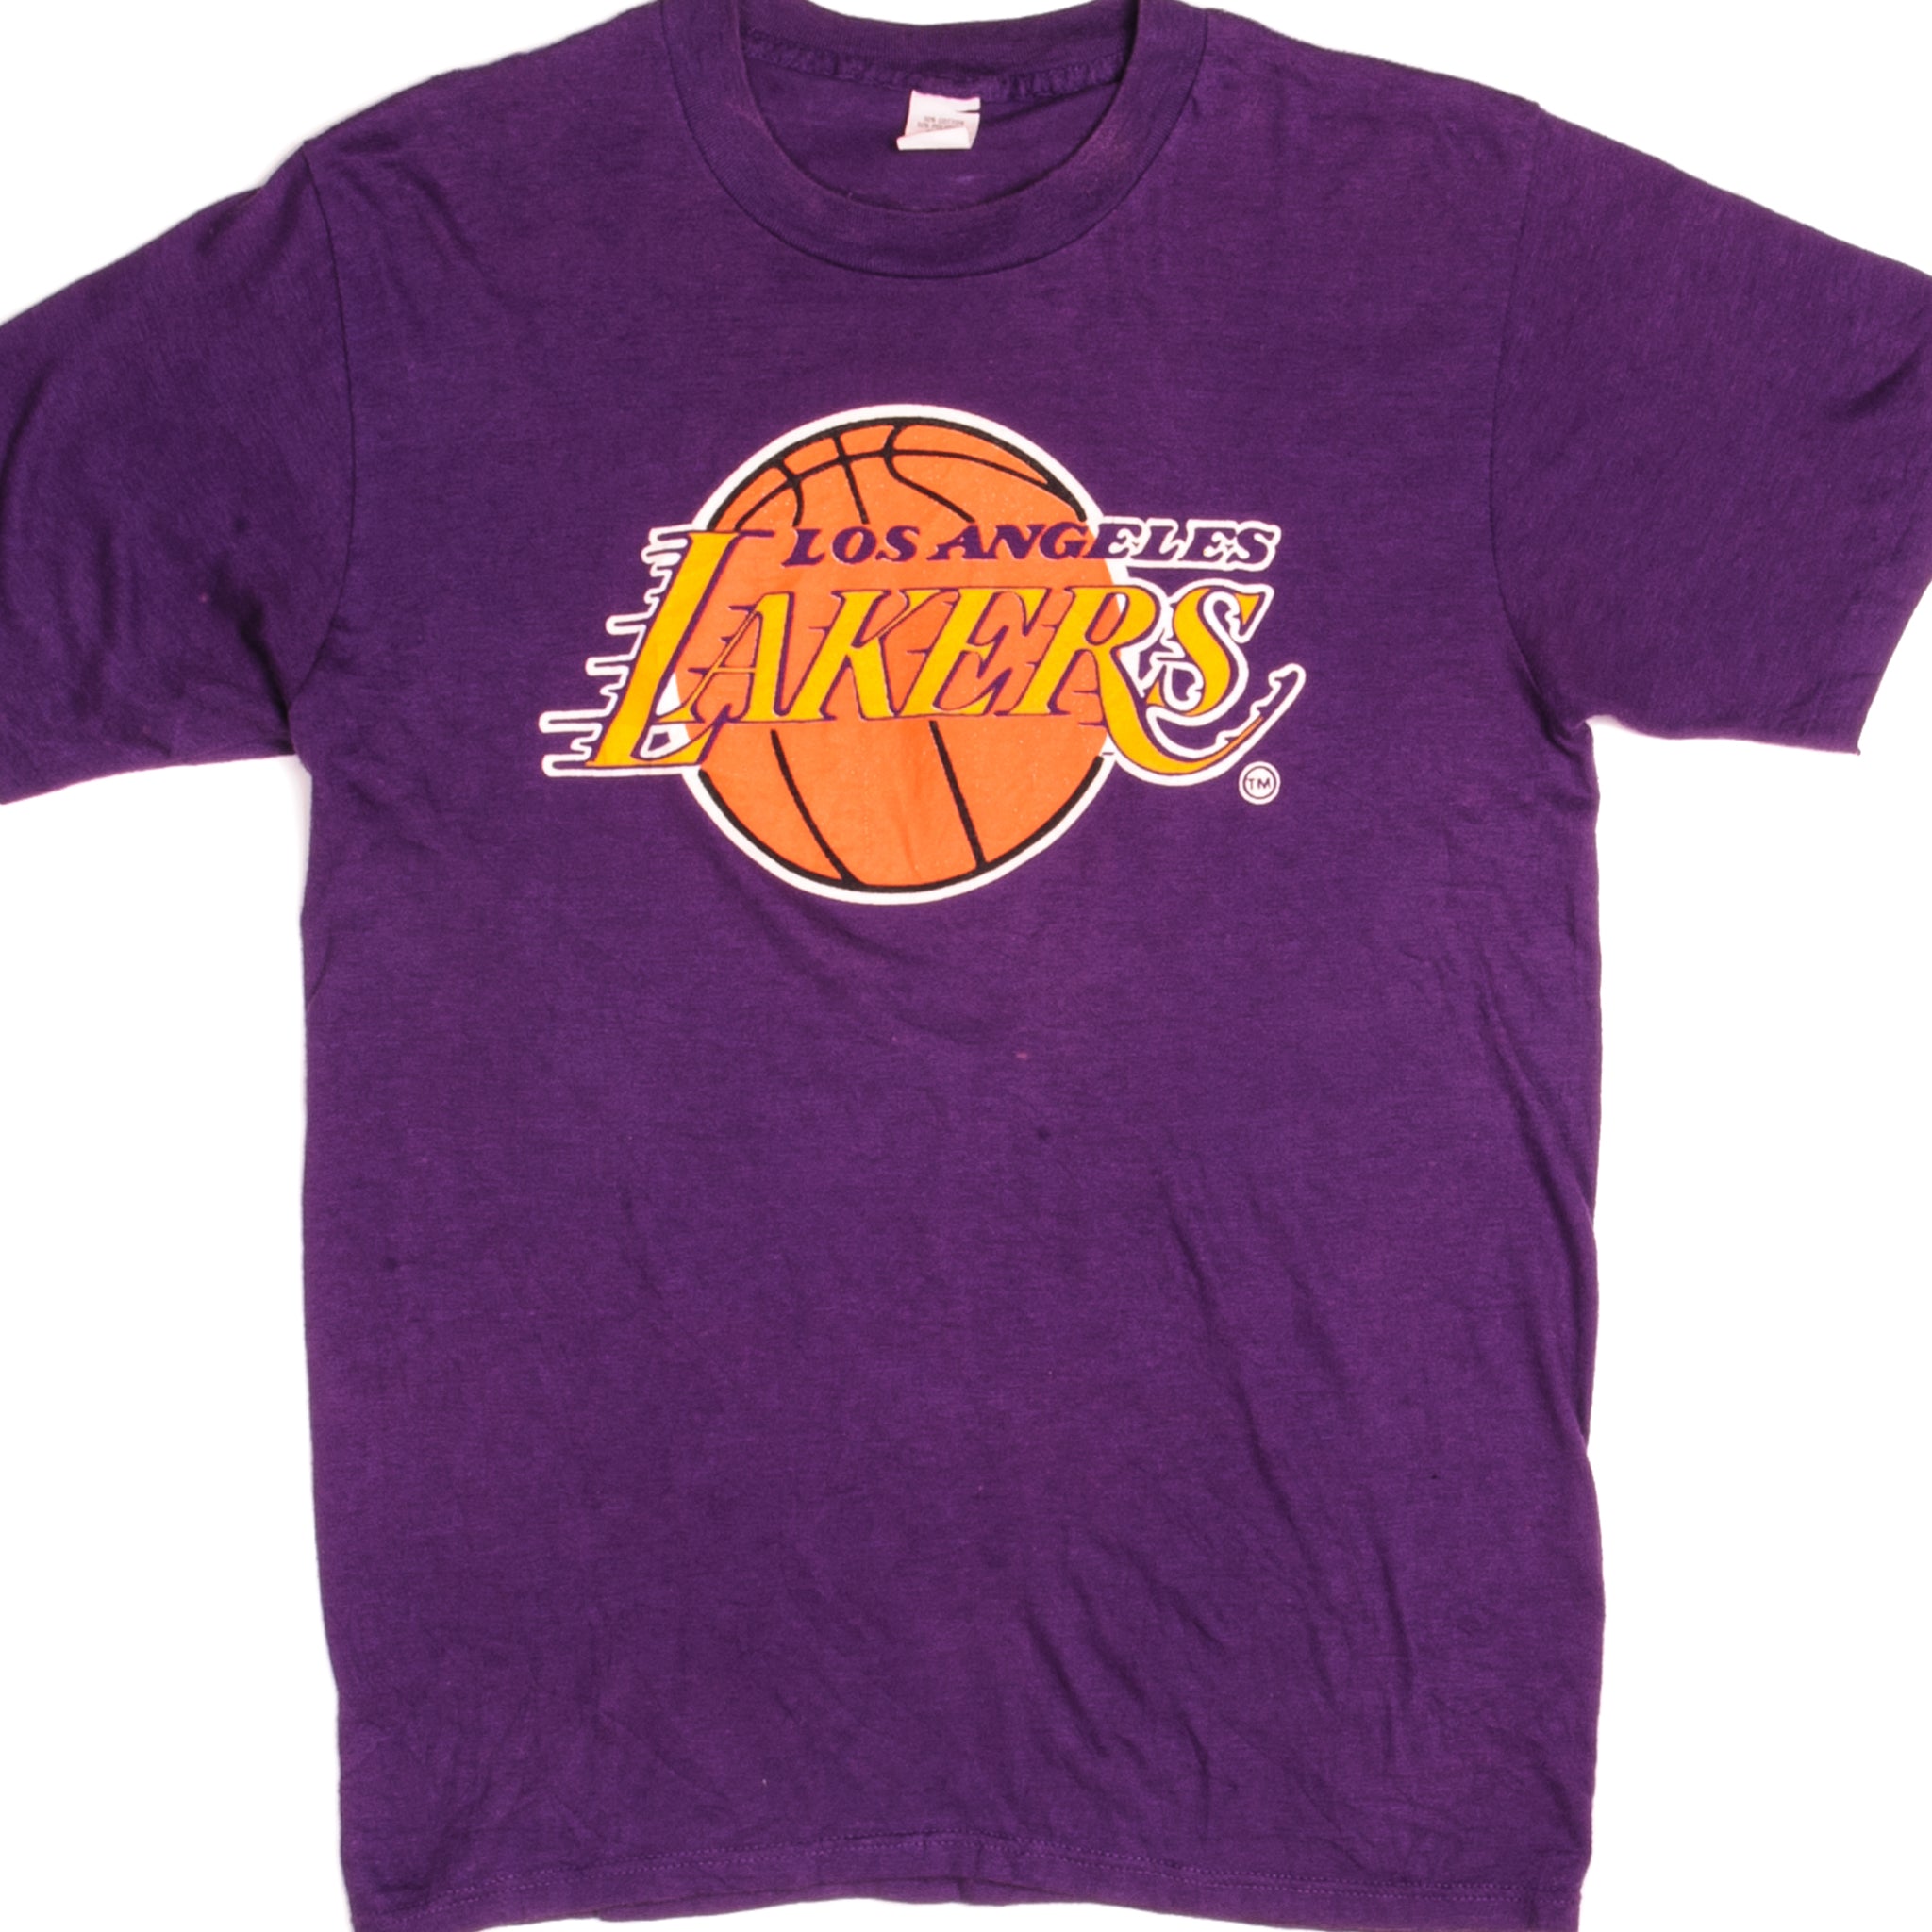 Vintage NBA Los Angeles Lakers Tee Shirt Size Small Made in USA 1980s